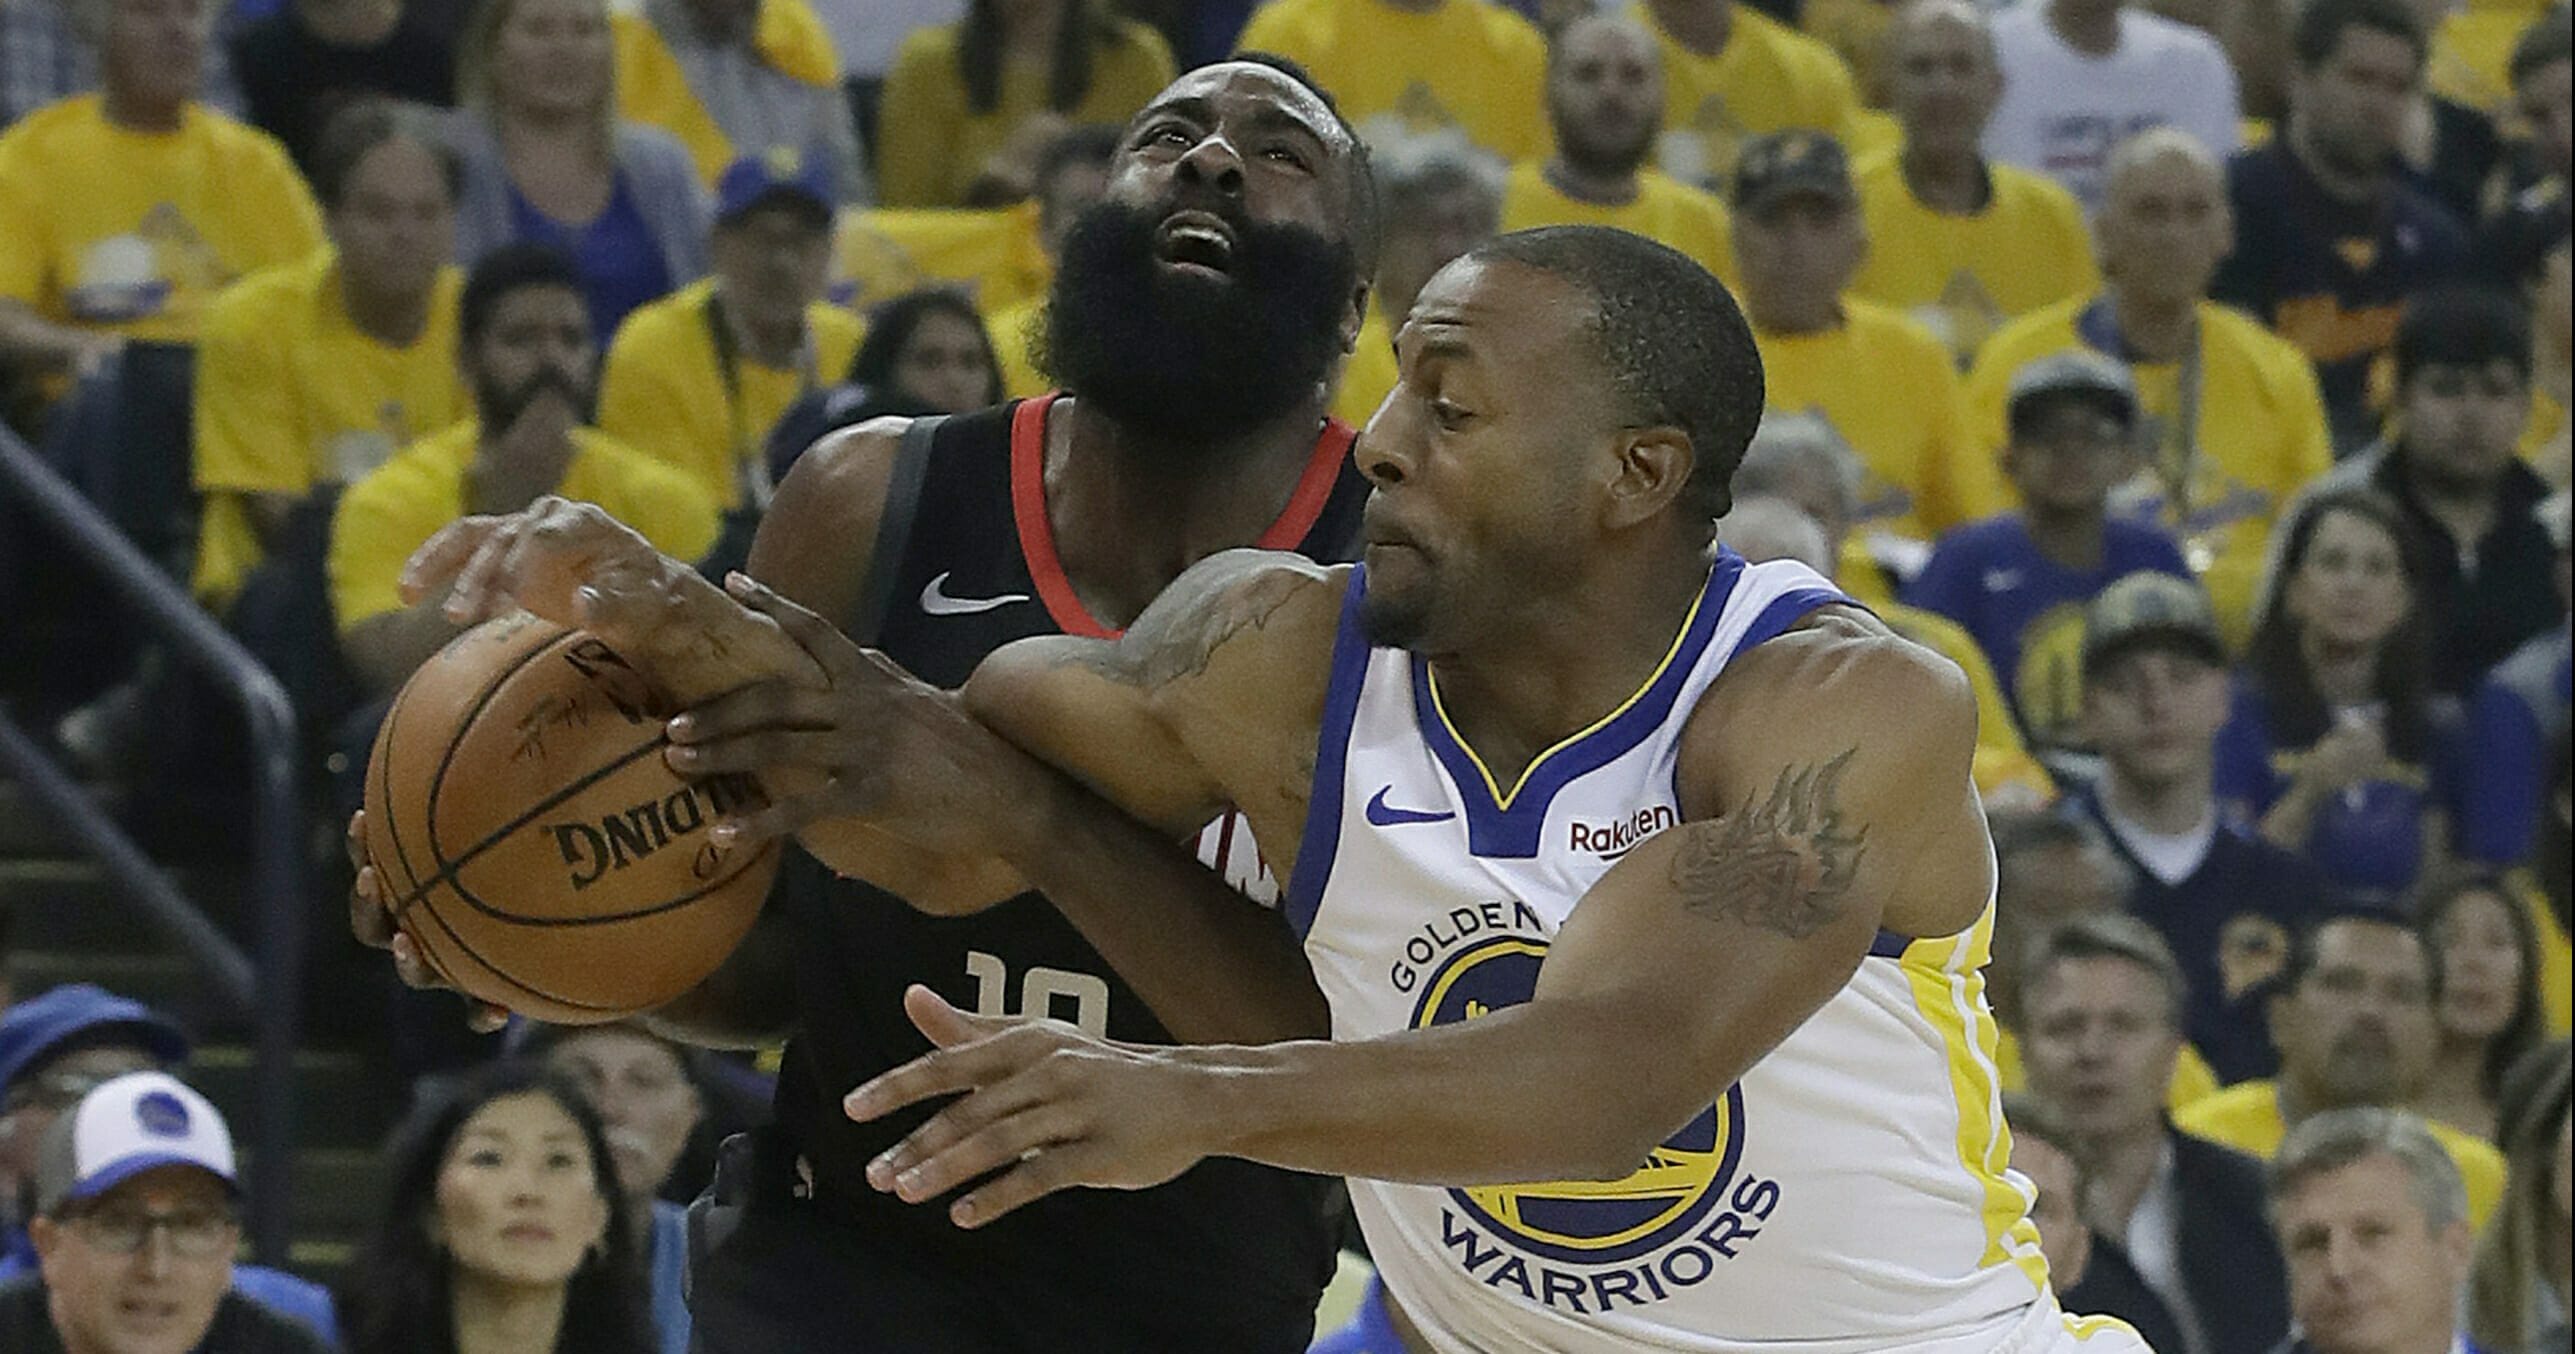 Houston Rockets guard James Harden, left, is fouled by Golden State Warriors guard Andre Iguodala.